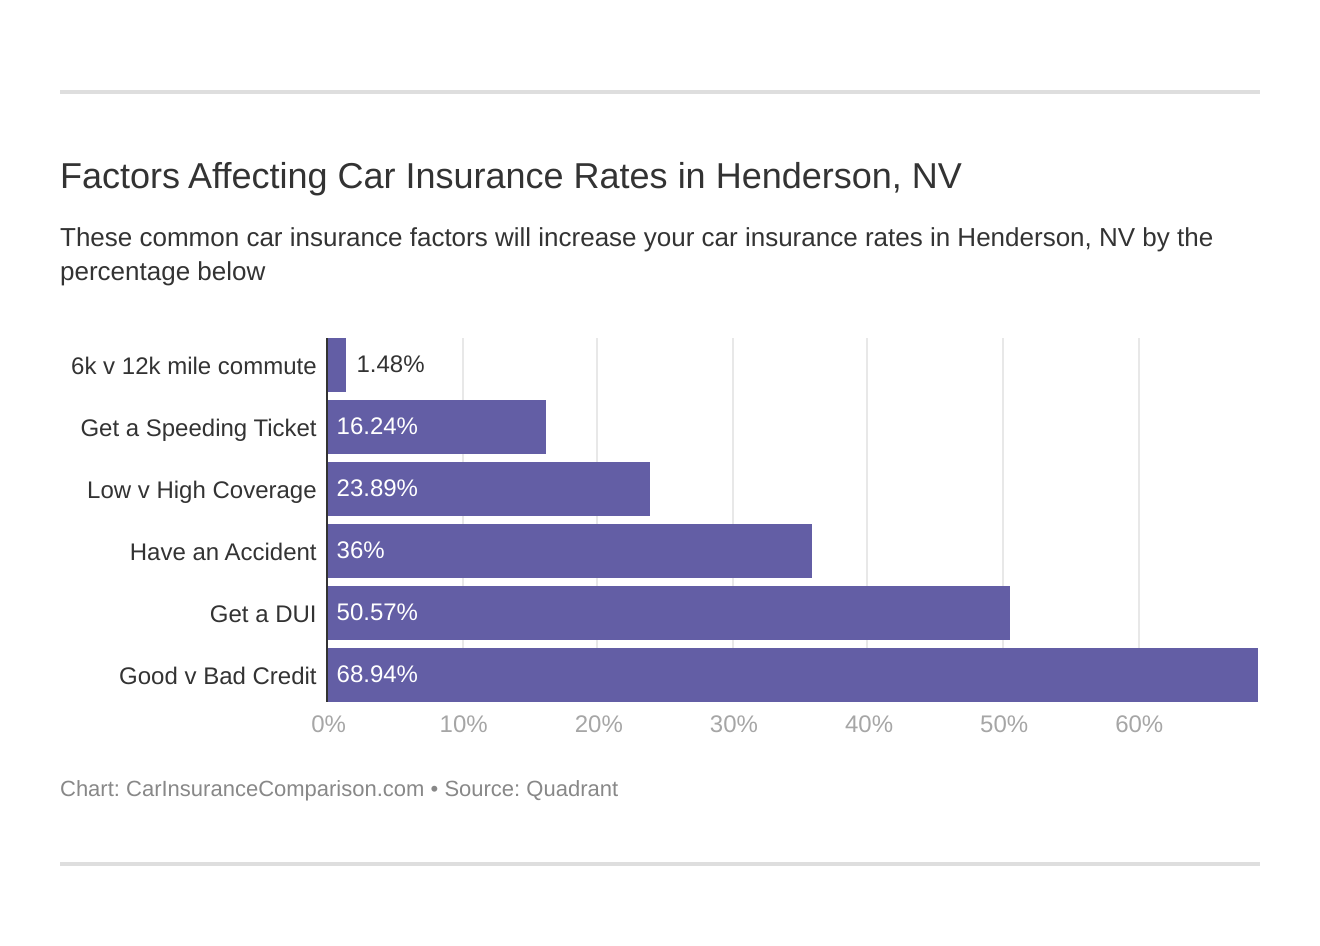 Factors Affecting Car Insurance Rates in Henderson, NV